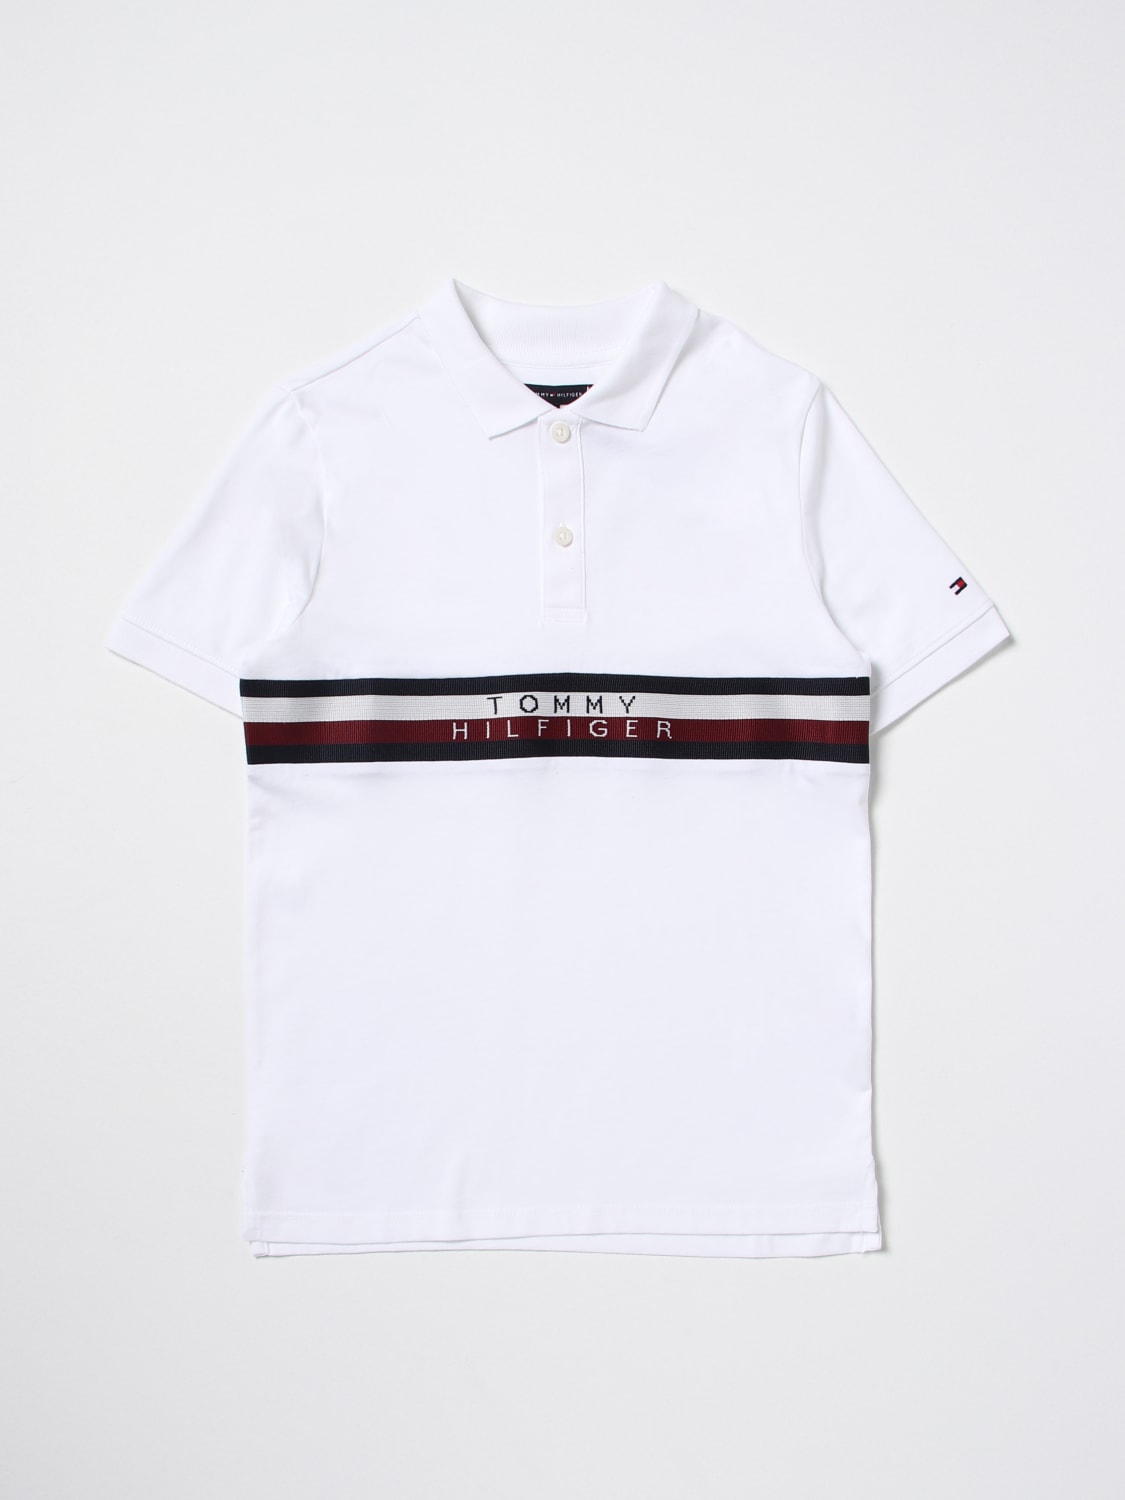 Tommy Hilfiger Outlet: polo shirt for boys - White | Tommy Hilfiger polo  shirt KB0KB08157 online at